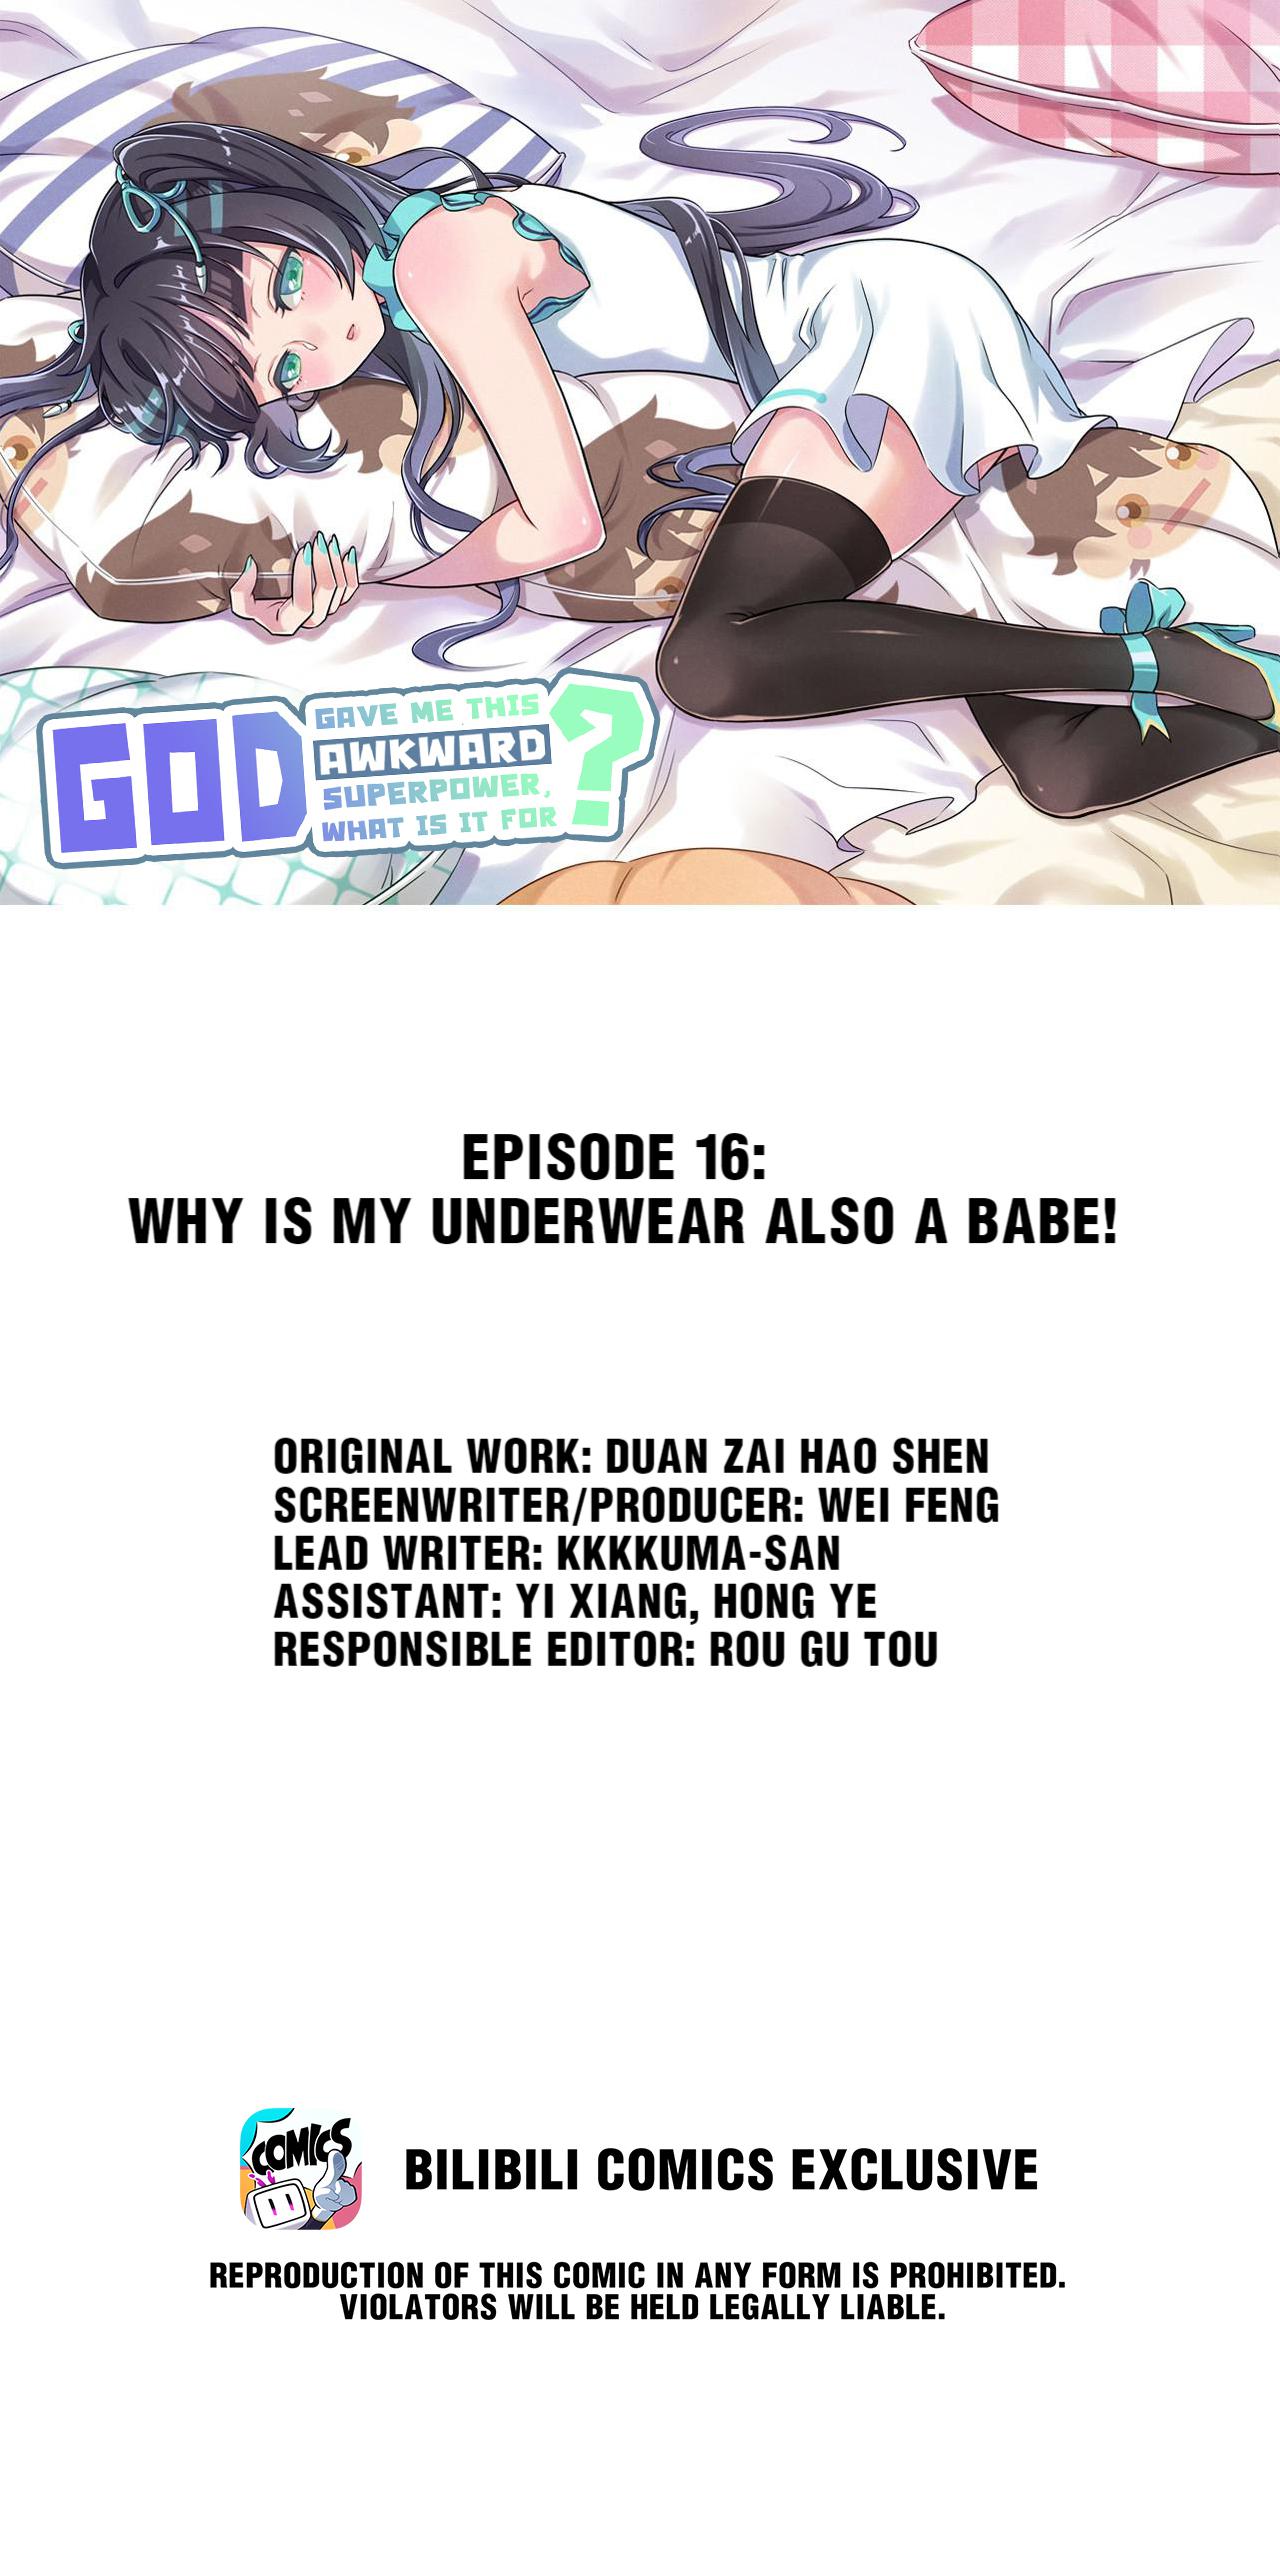 God Gave Me This Awkward Superpower, What Is It for? 16 Why Is My Underwear Also A Babe!